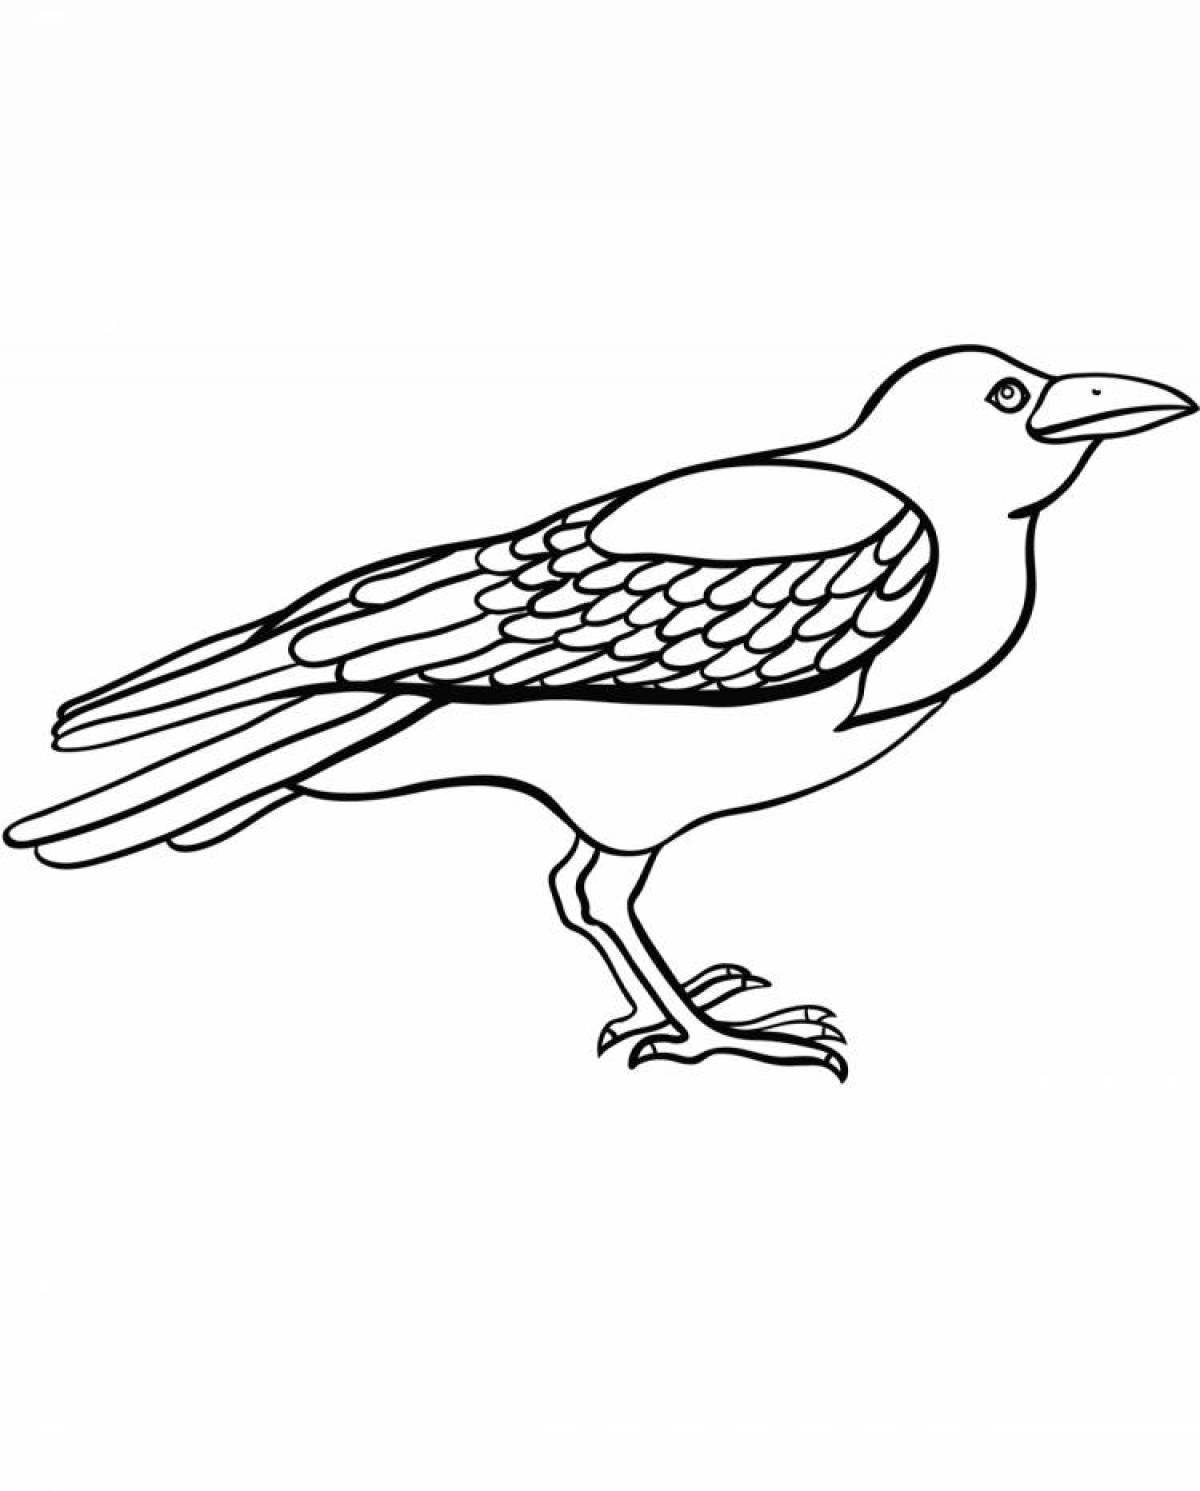 Cute crow coloring book for kids